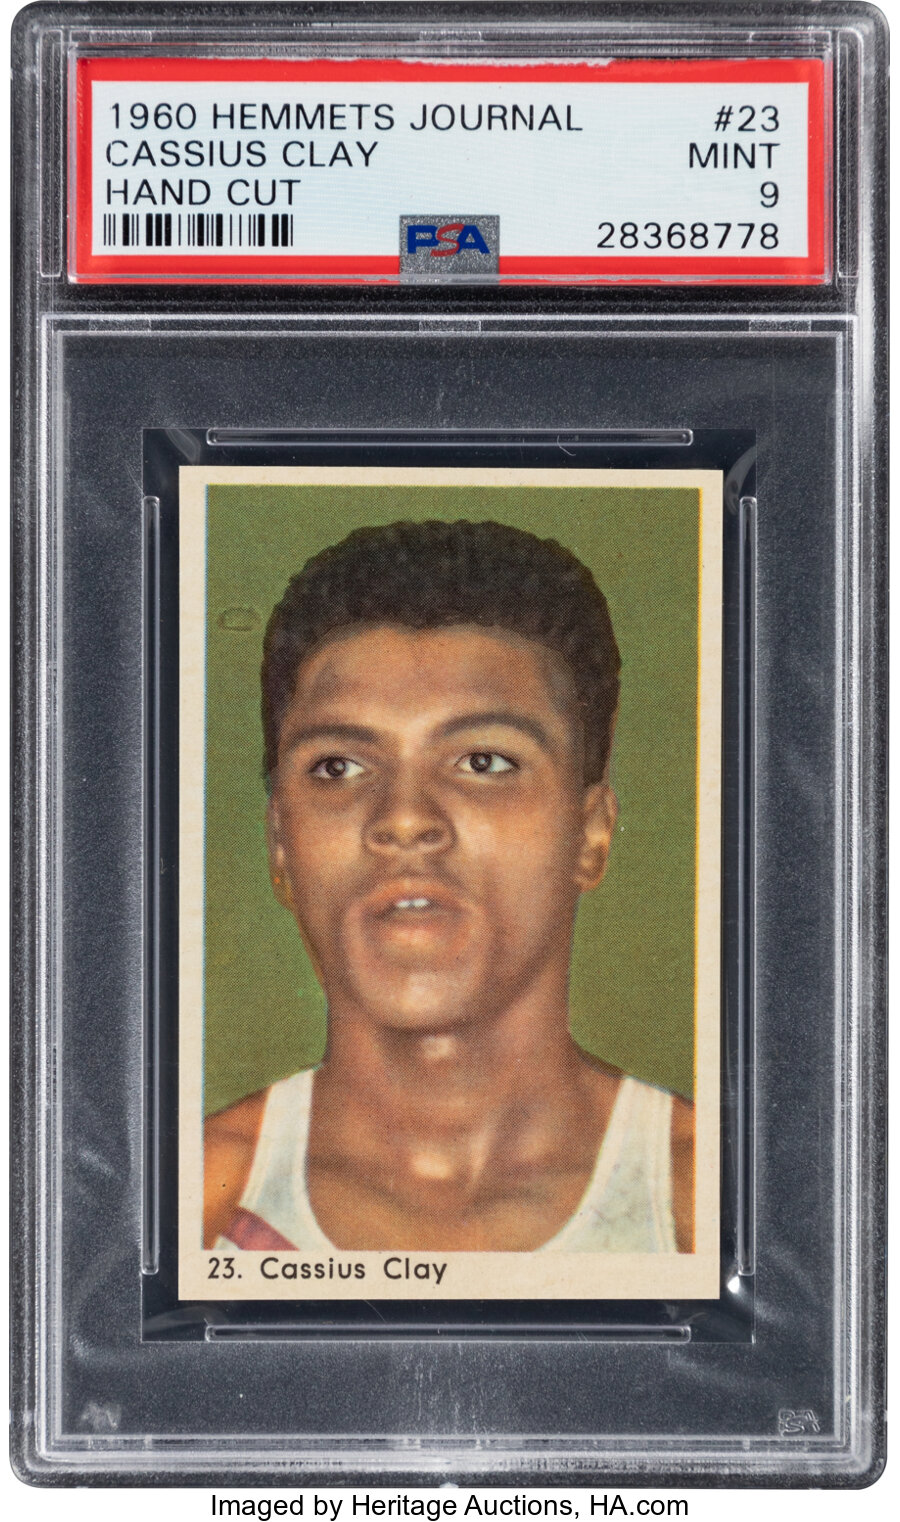 1960 Hemmets Journal Cassius Clay (Muhammad Ali) Rookie #23 PSA Mint 9 - Only One Superior